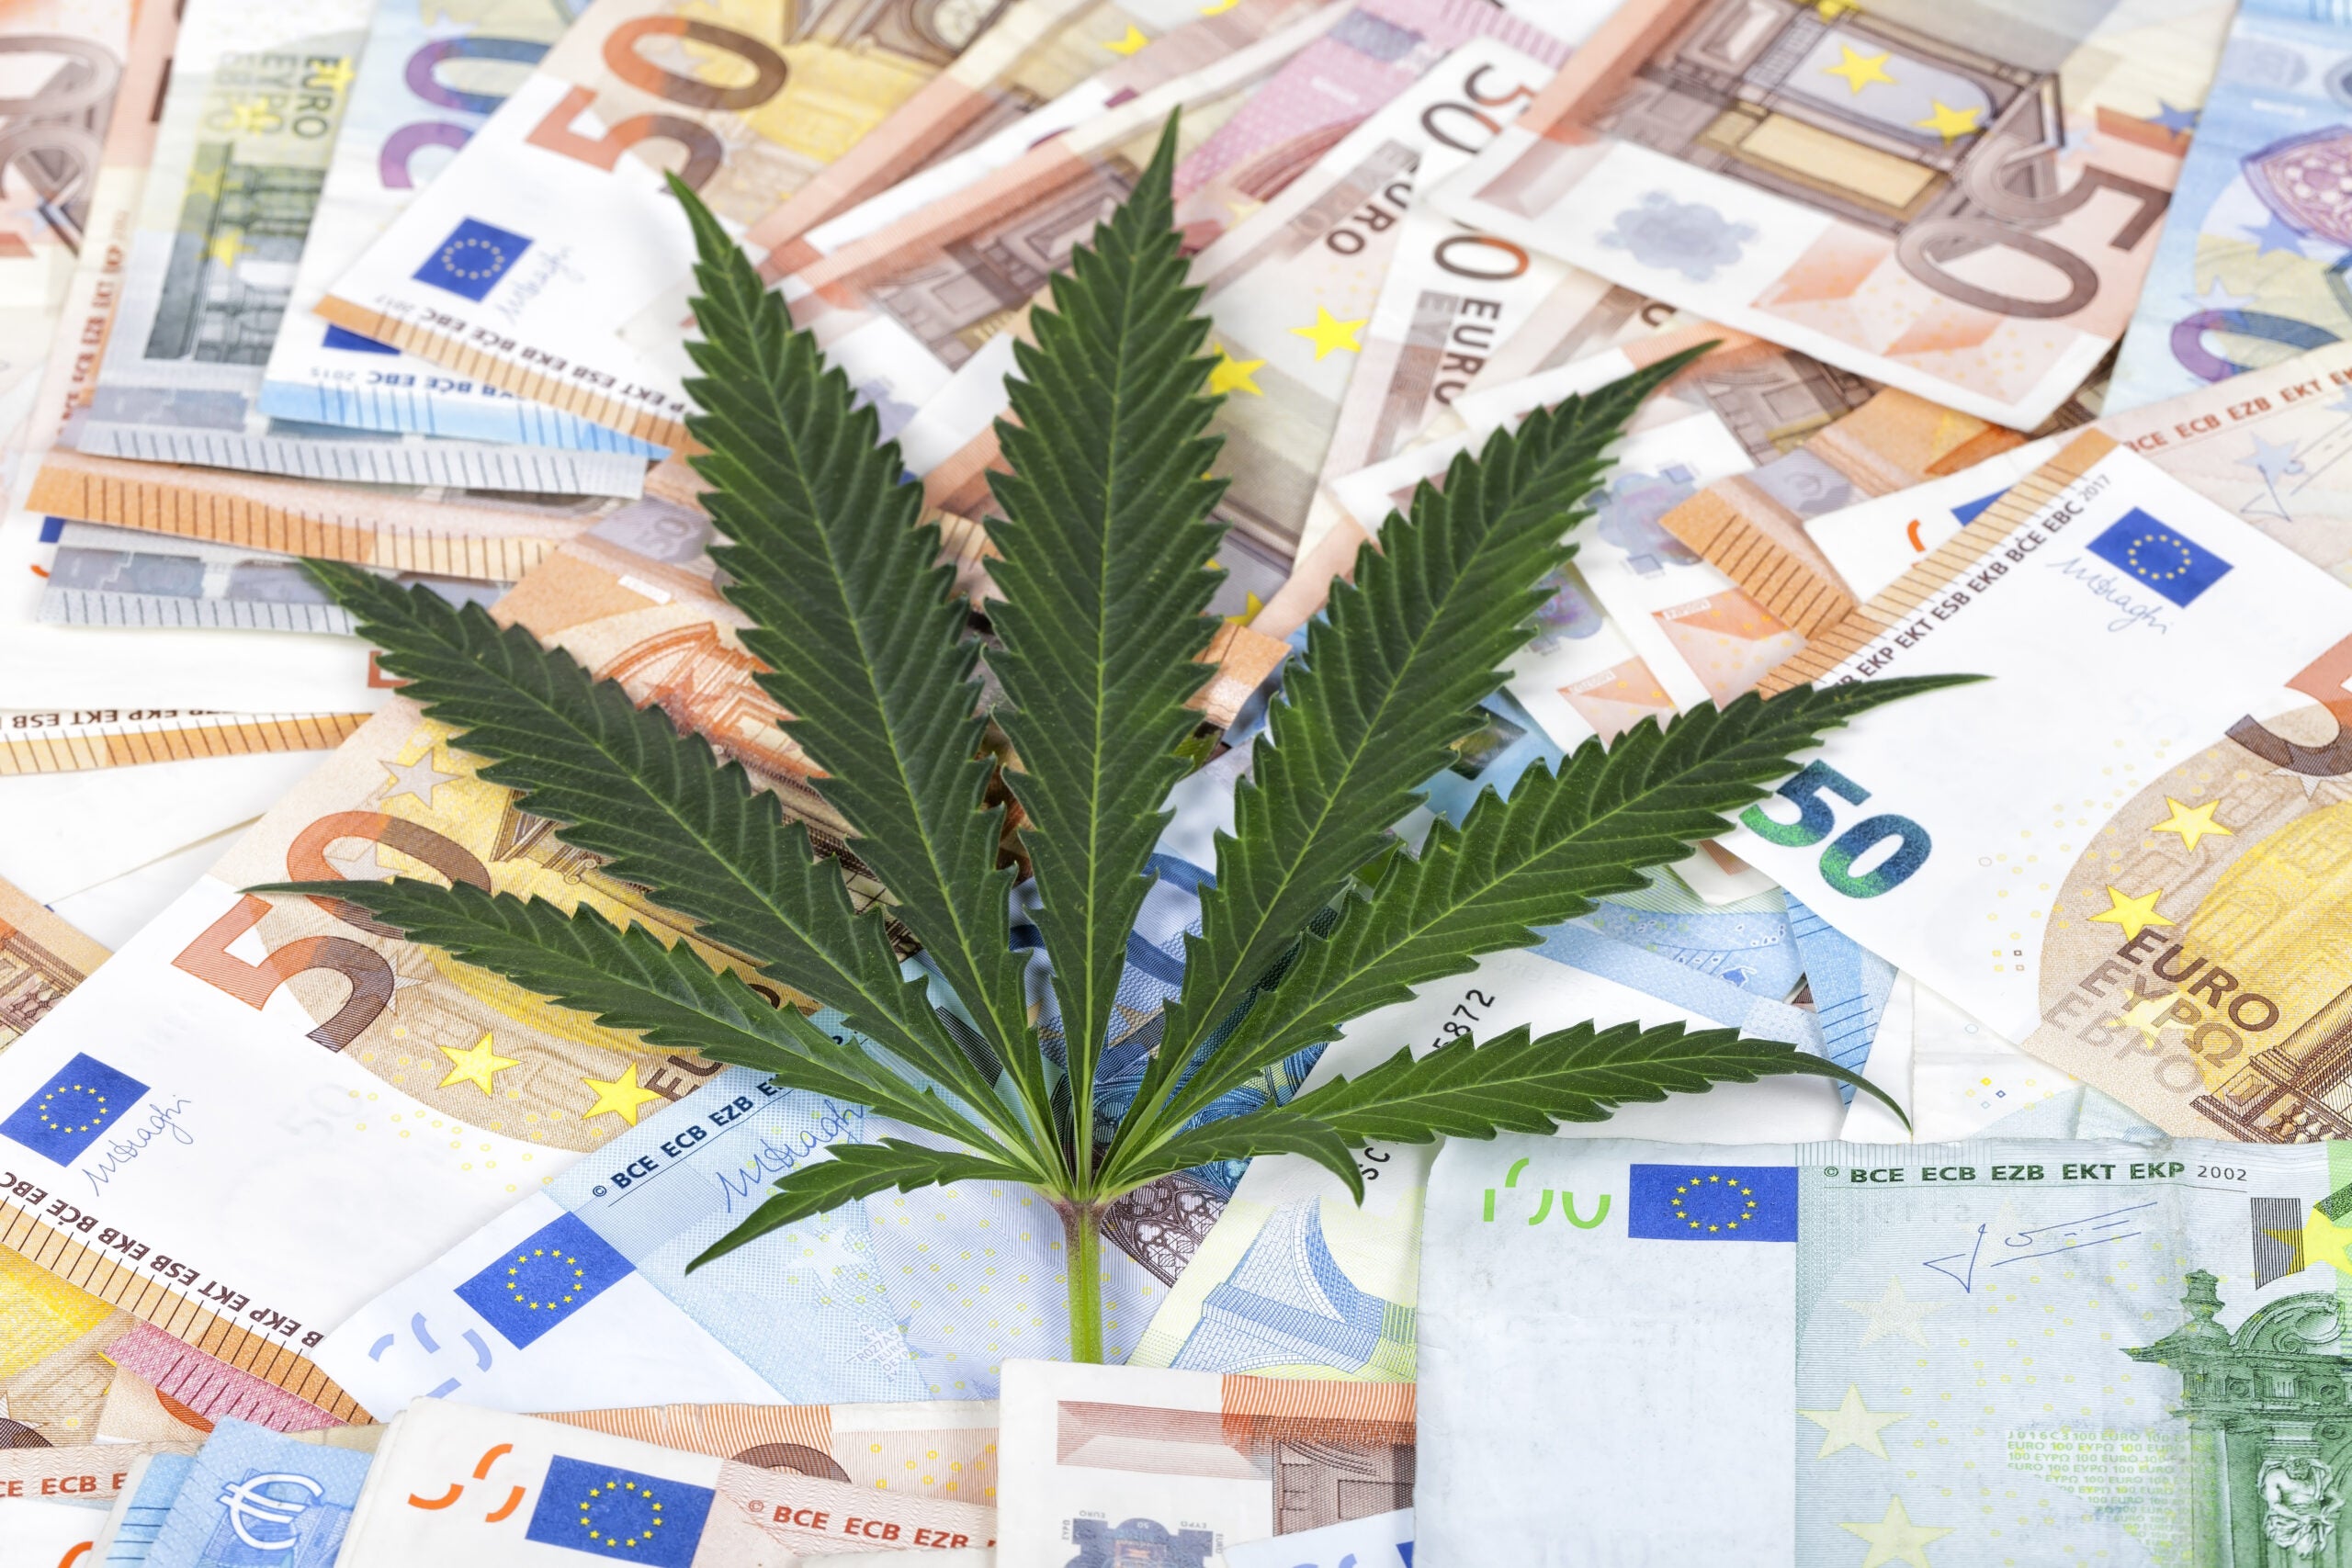 Global Cannabis Sales Projected To Double By 2025